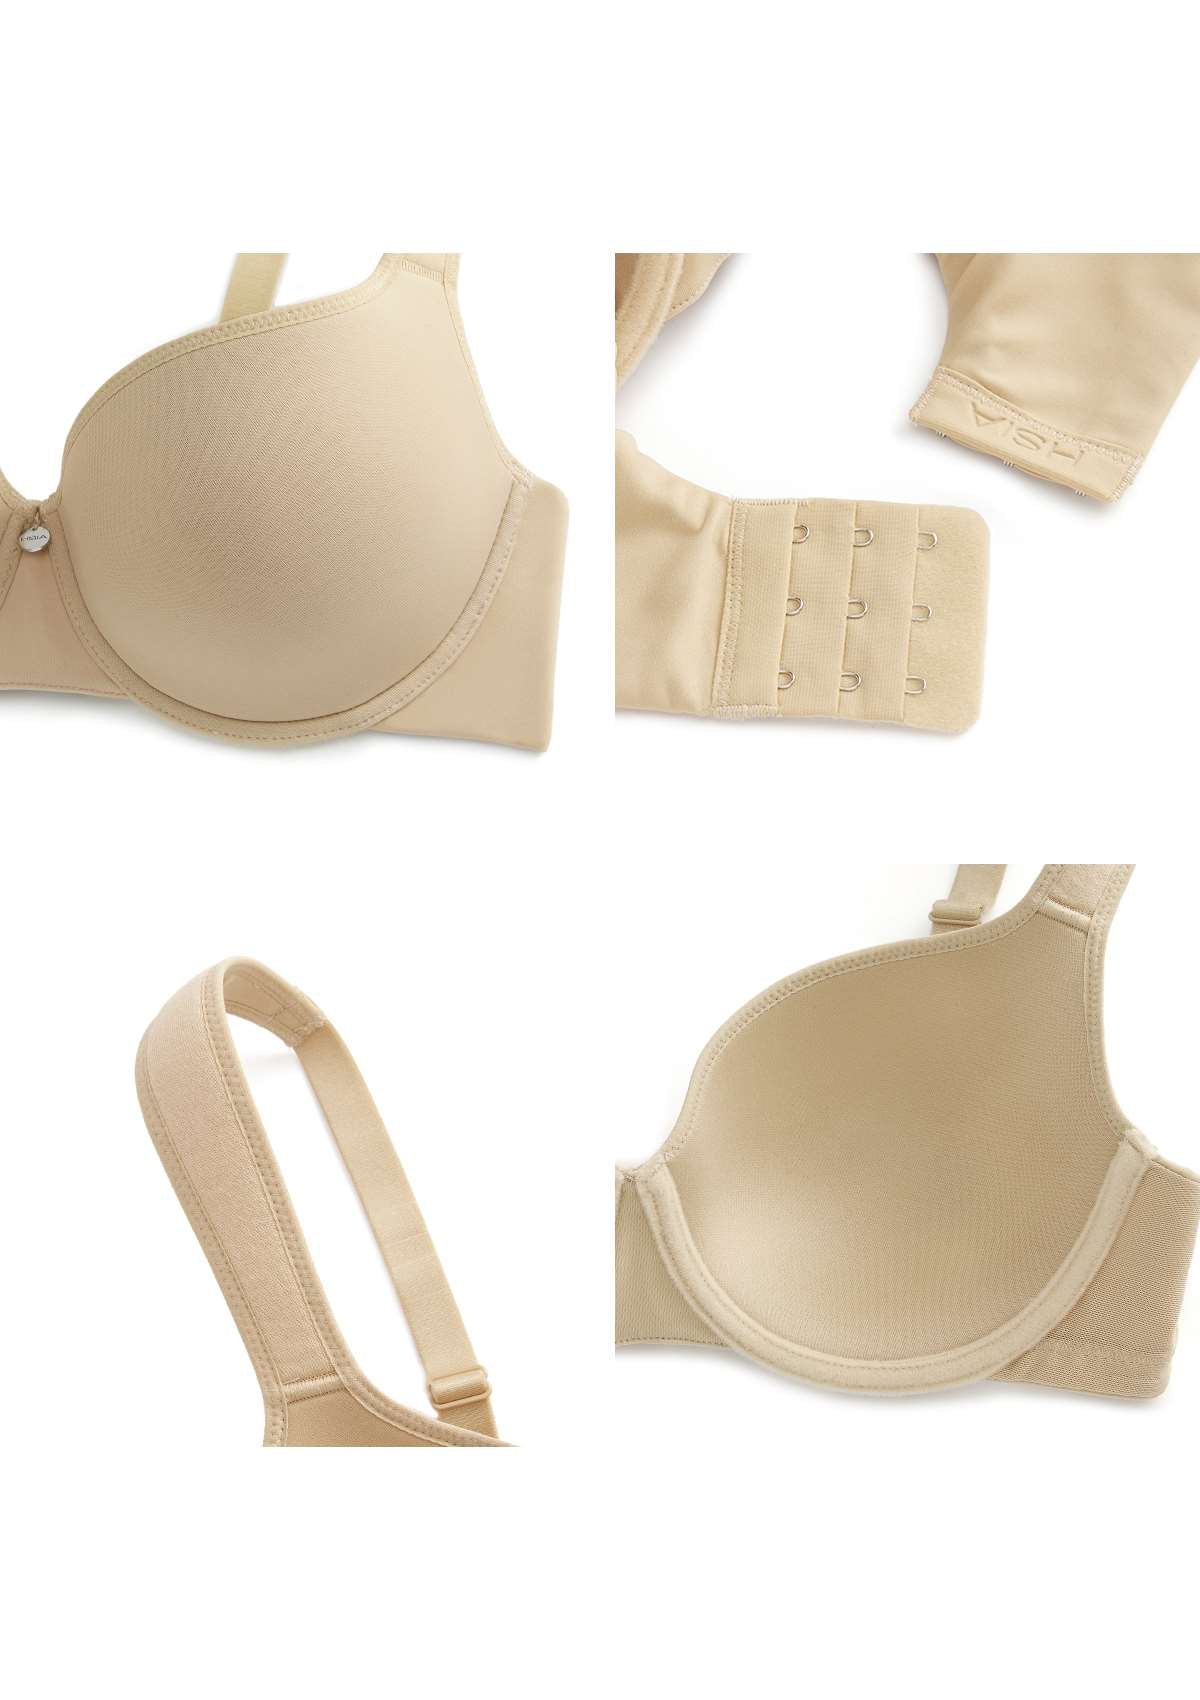 HSIA Patricia Seamless Lightly Padded Minimizer Bra -for Bigger Busts - Beige / 42 / H